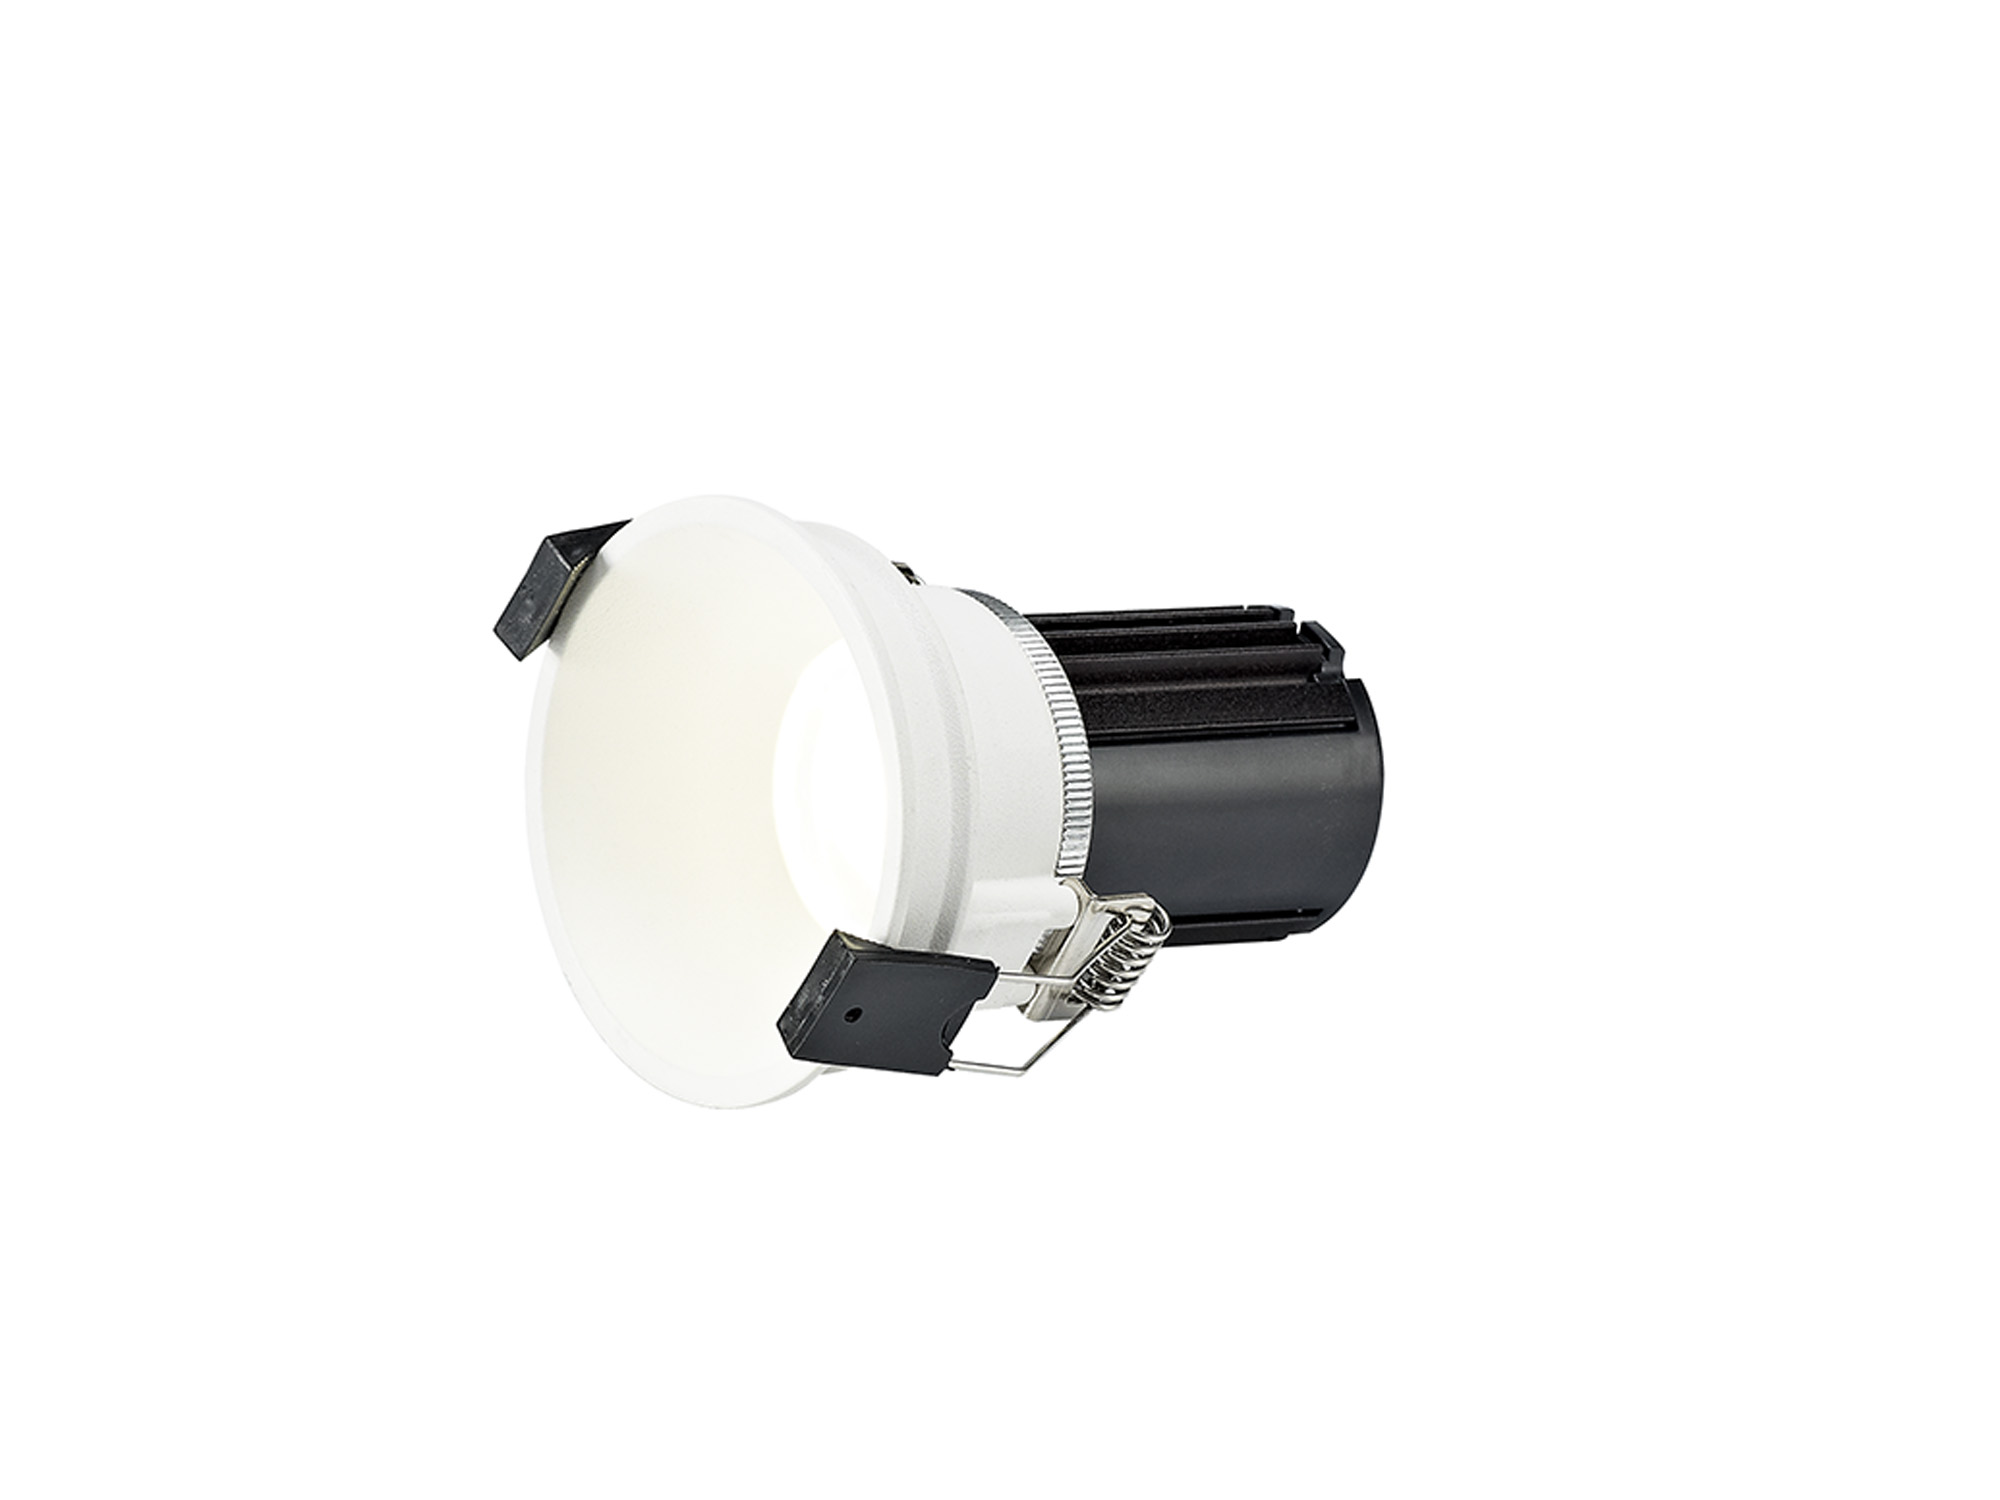 DM201612  Bania 12 Tridonic Powered 12W 3000K 1200lm 36° , 300mA CRI>90 LED Engine White Fixed Recessed Spotlight, Cut Out: 76mm, IP20, 5yrs Warranty